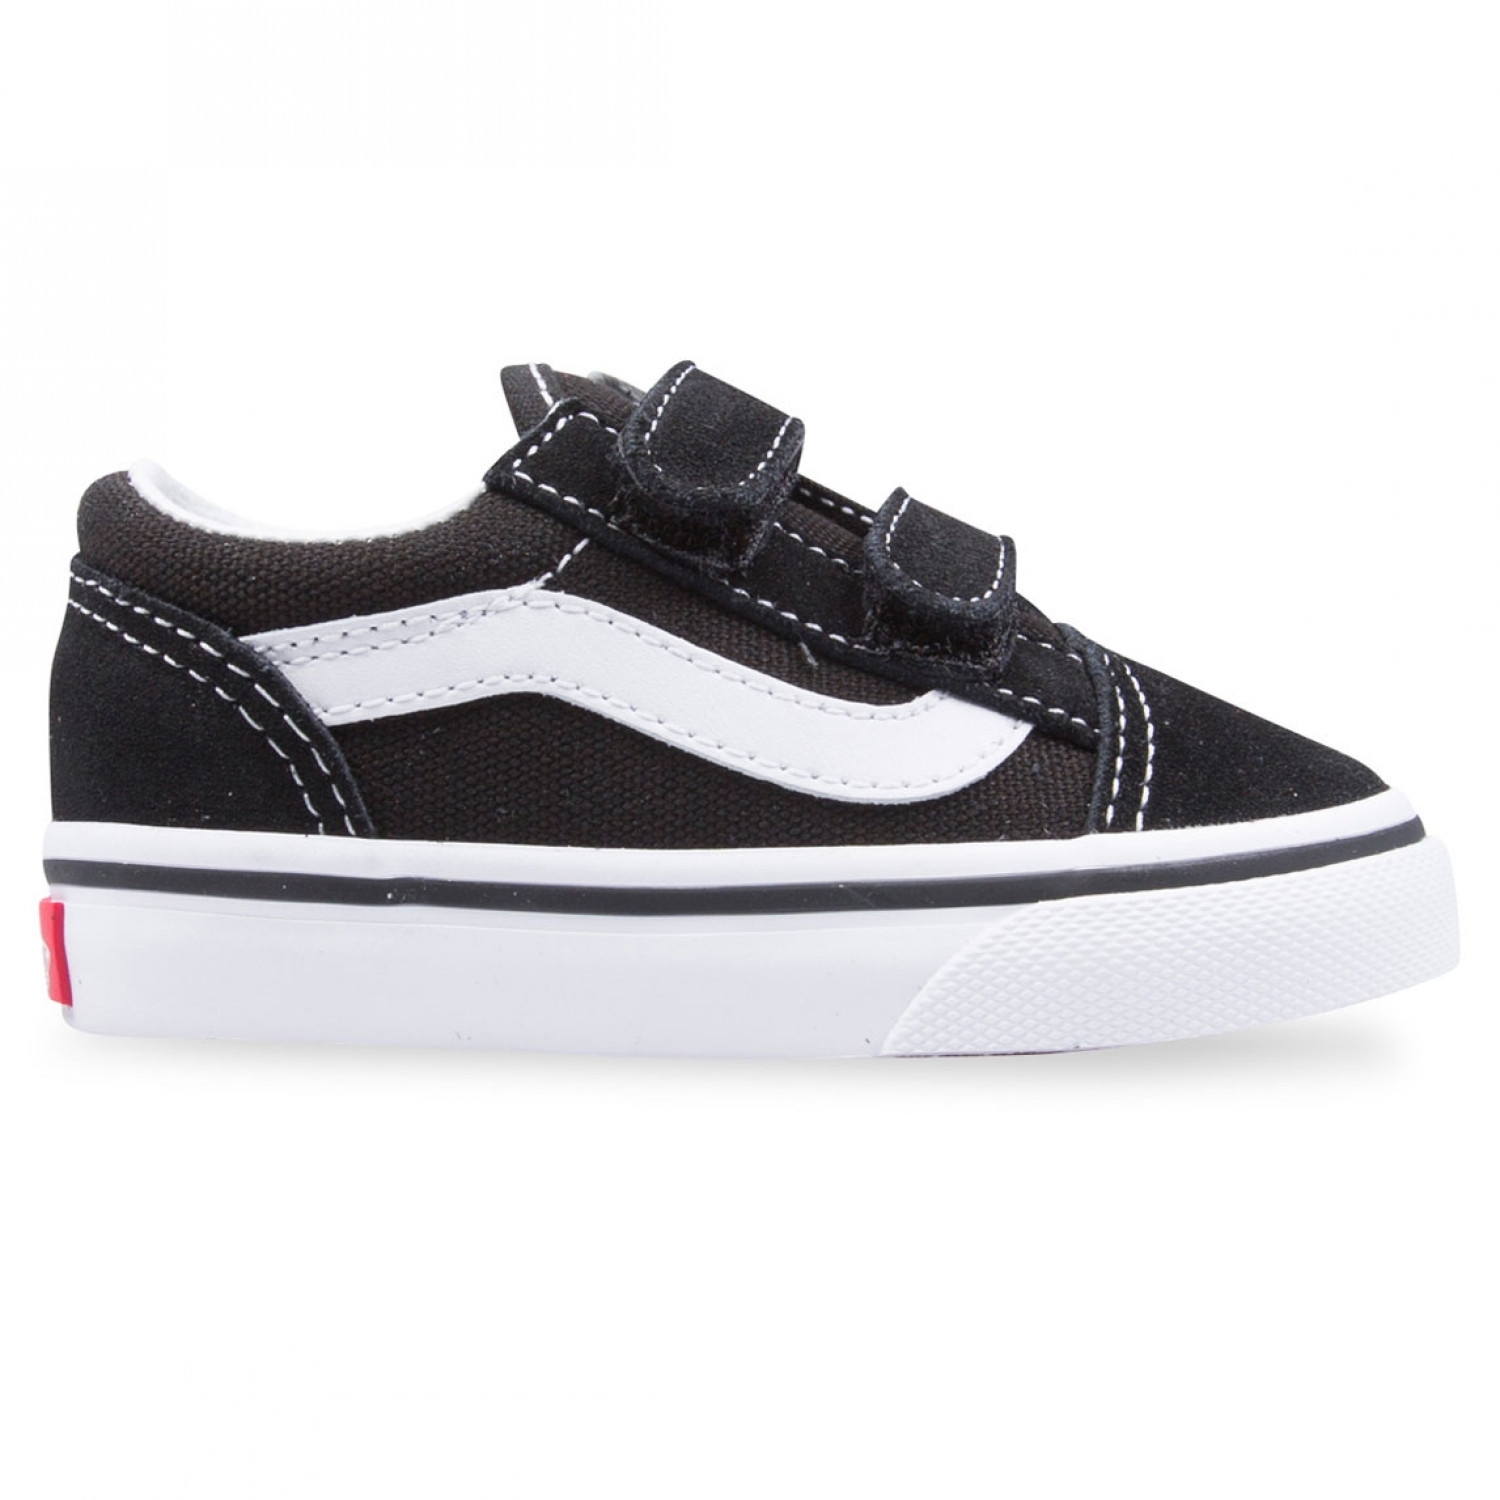 black and white vans youth